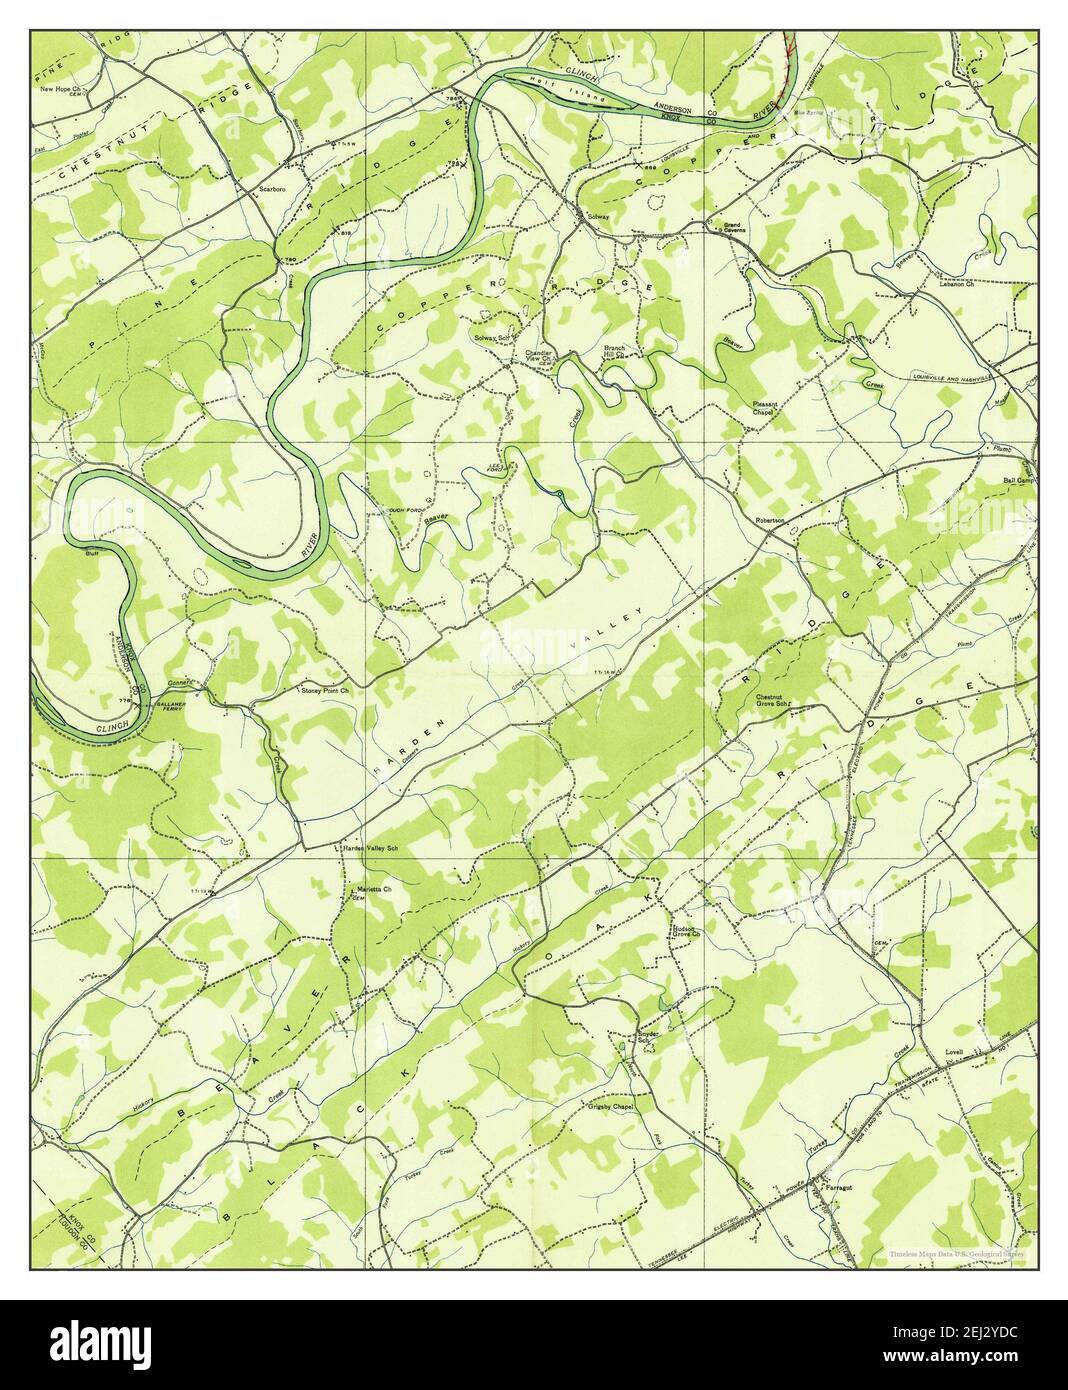 Lovell, Tennessee, map 1935, 1:24000, United States of America by Timeless Maps, data U.S. Geological Survey Stock Photo